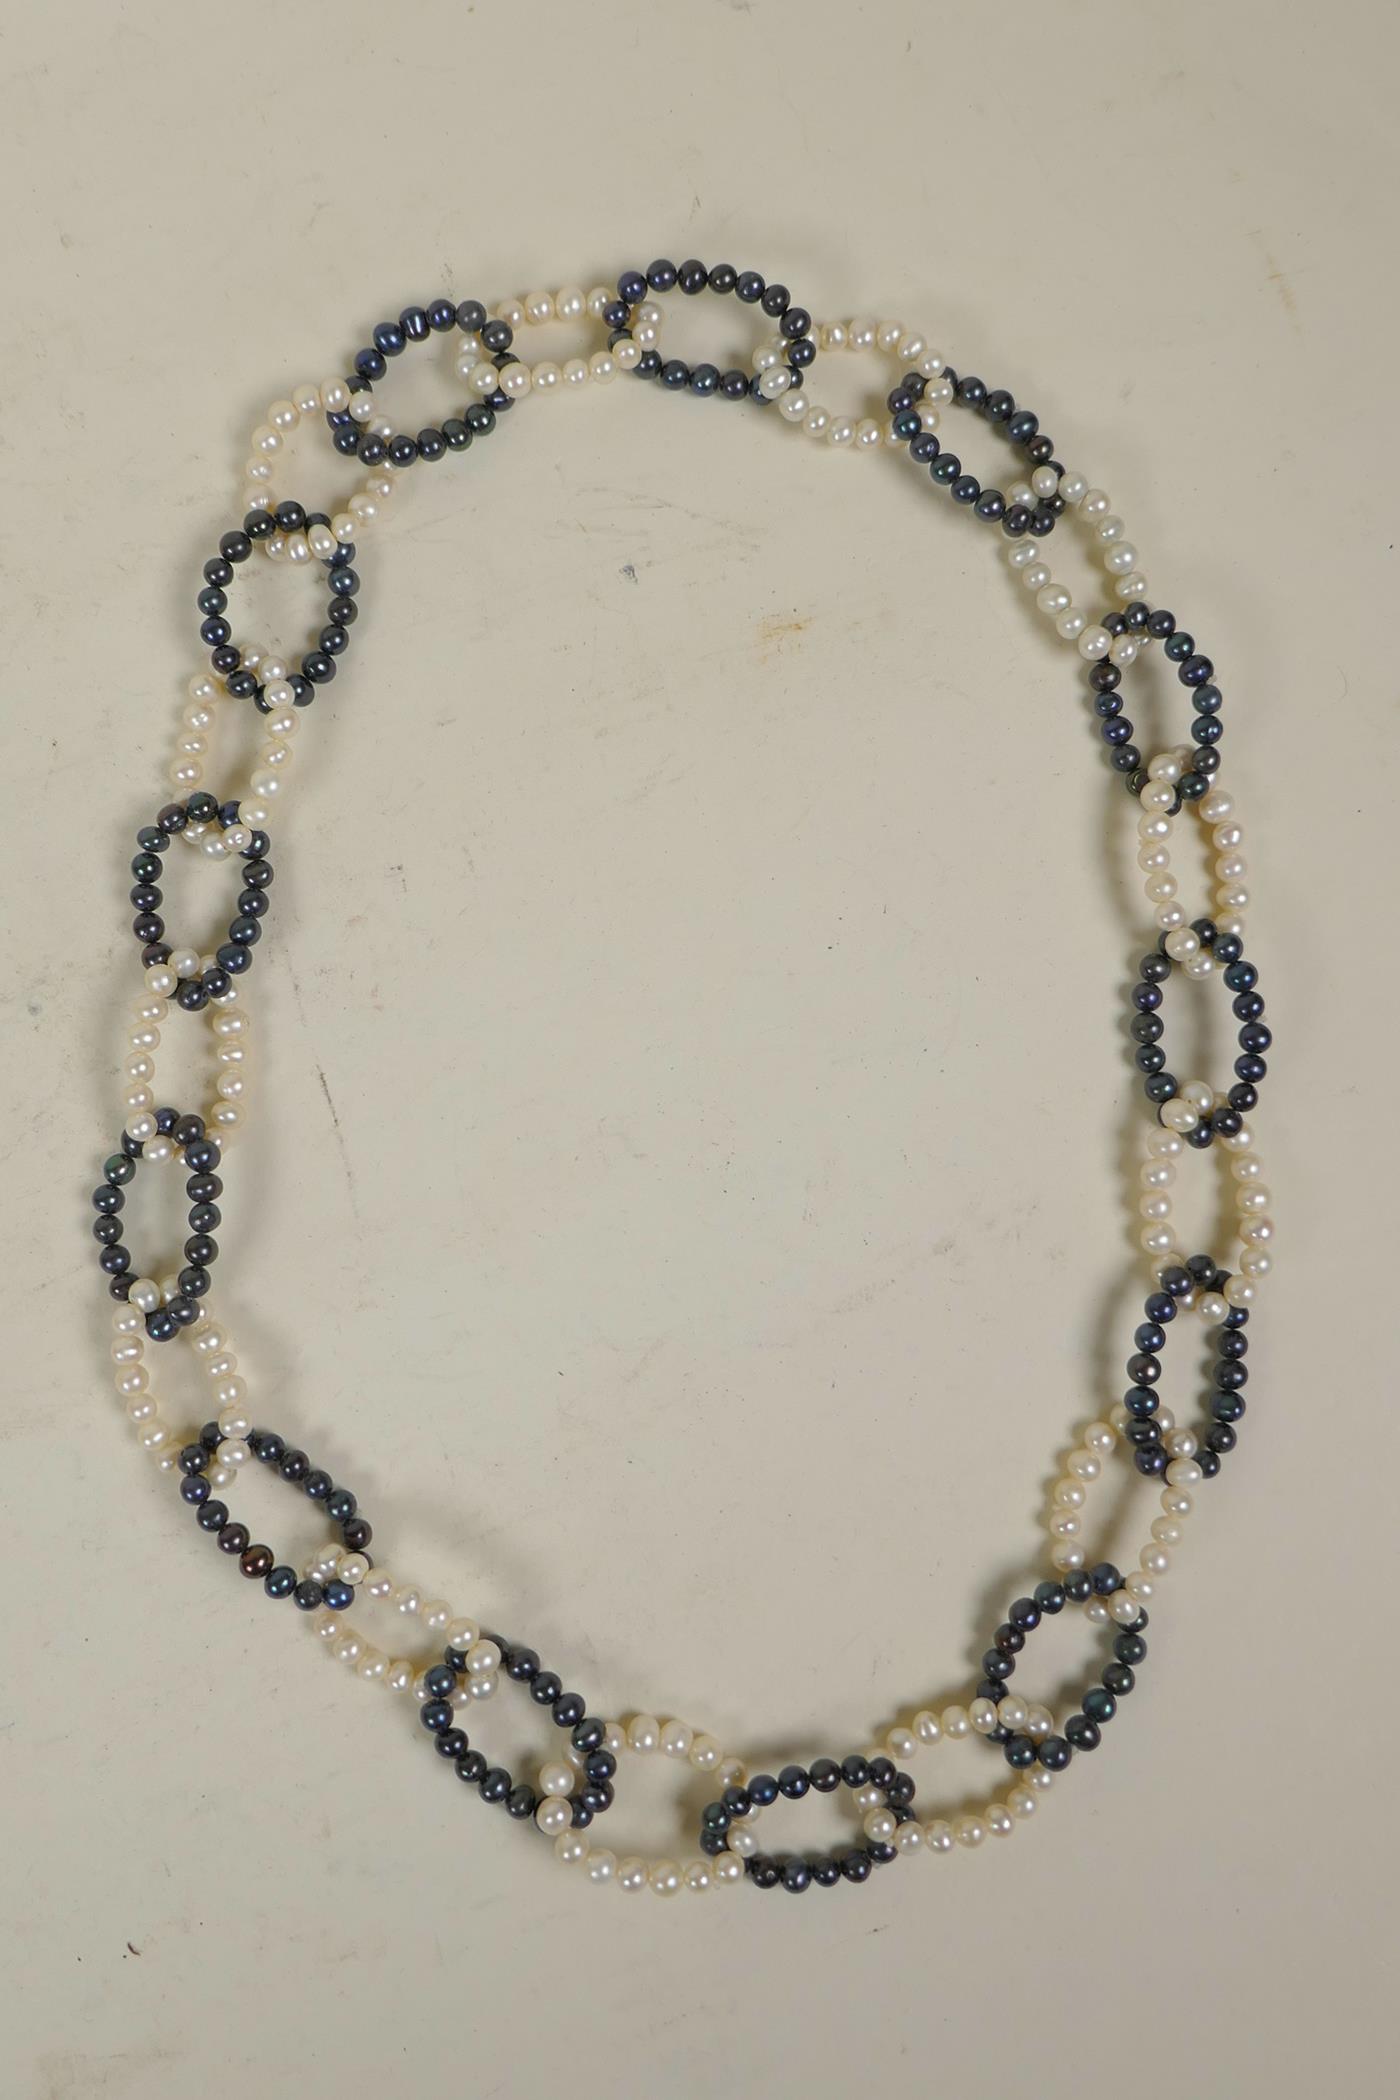 A Tahitian black and white pearl chain link necklace, 28" long